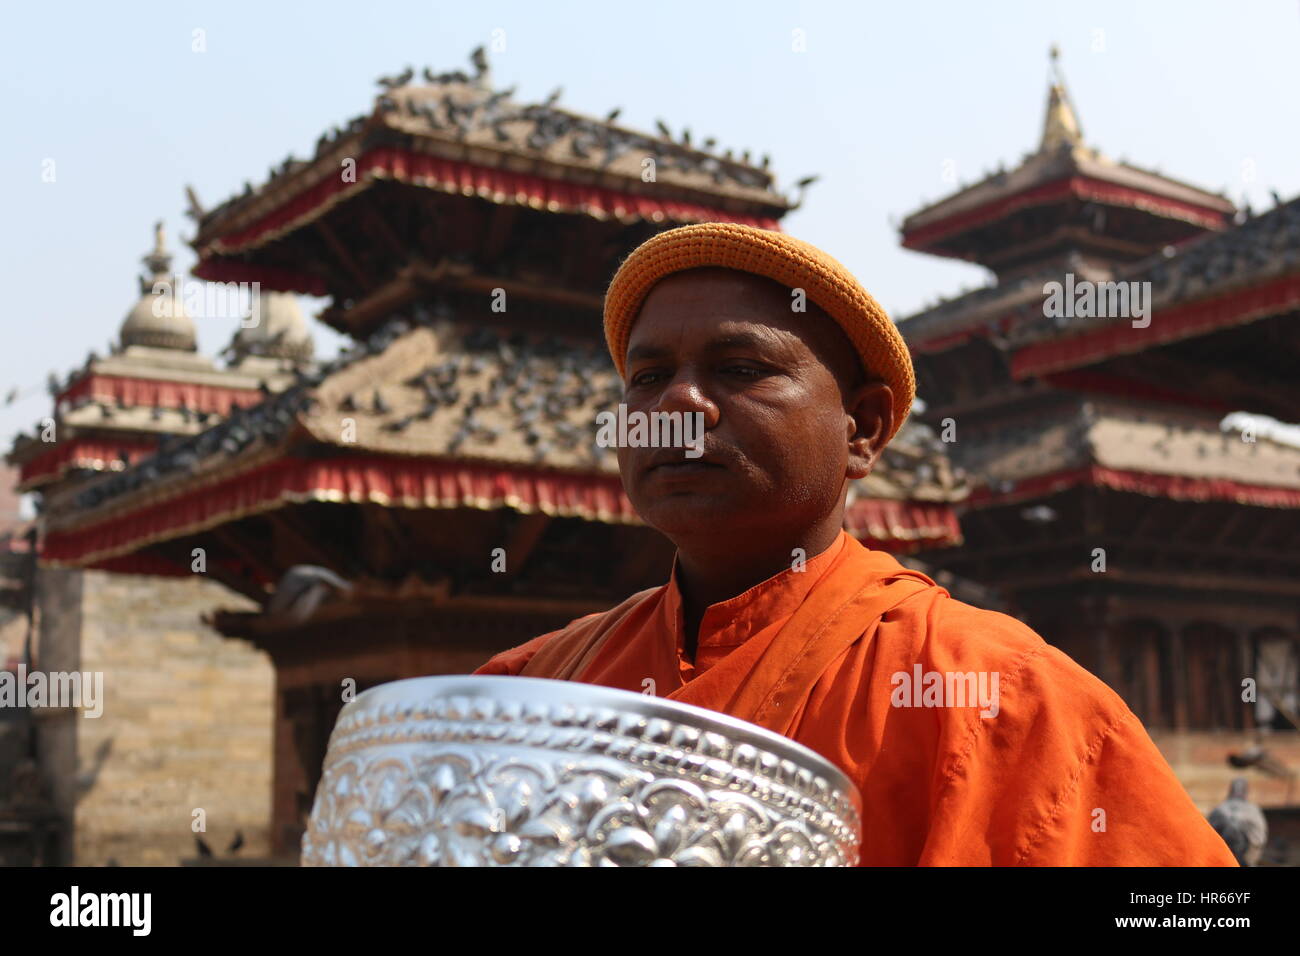 A Buddhist man standing in front of temples in Kathmandu Durbar Square.  Kathmandu Durbar Square is old royal palace of former Kathmandu kingdom. Stock Photo